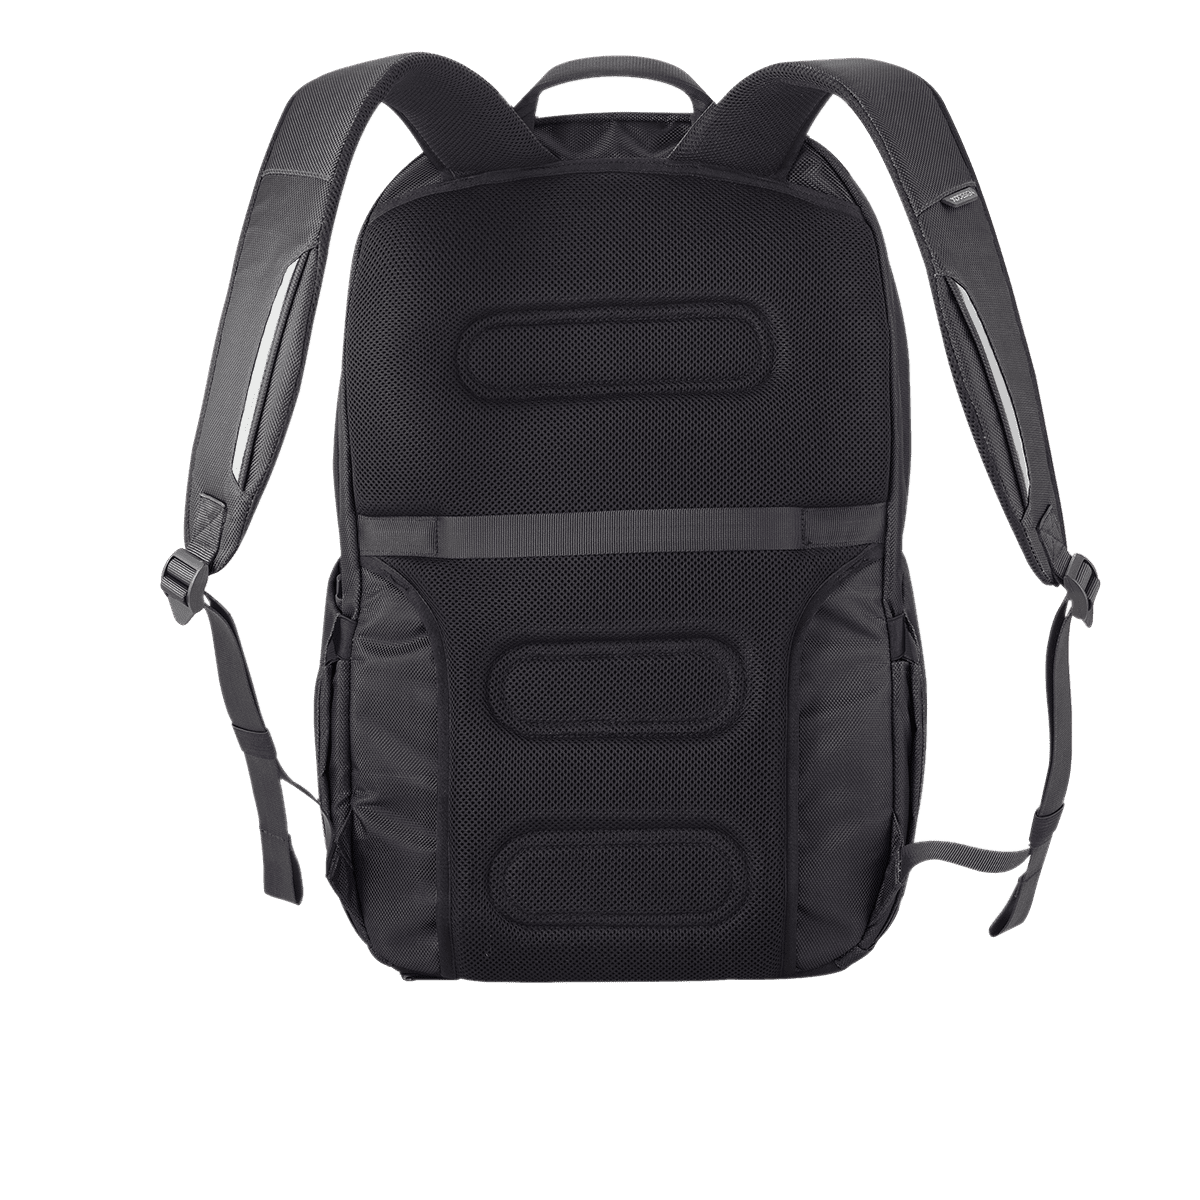 Bobby Explore Backpack 30L